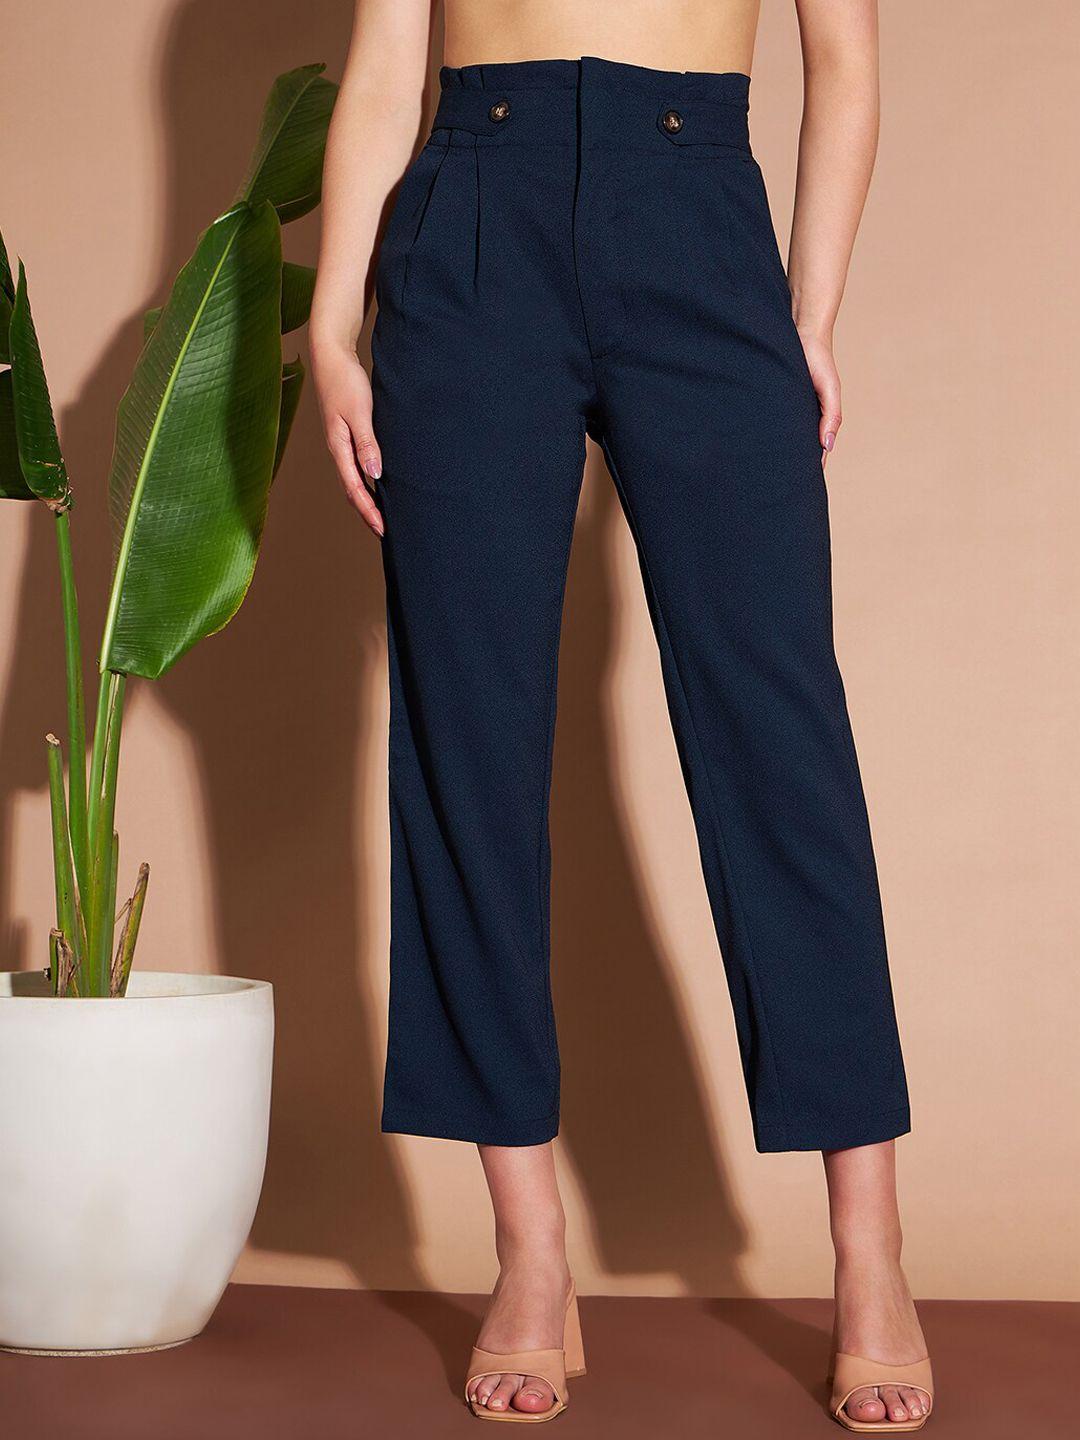 marie-claire-women-blue-high-rise-plain-pleated-cropped-trousers